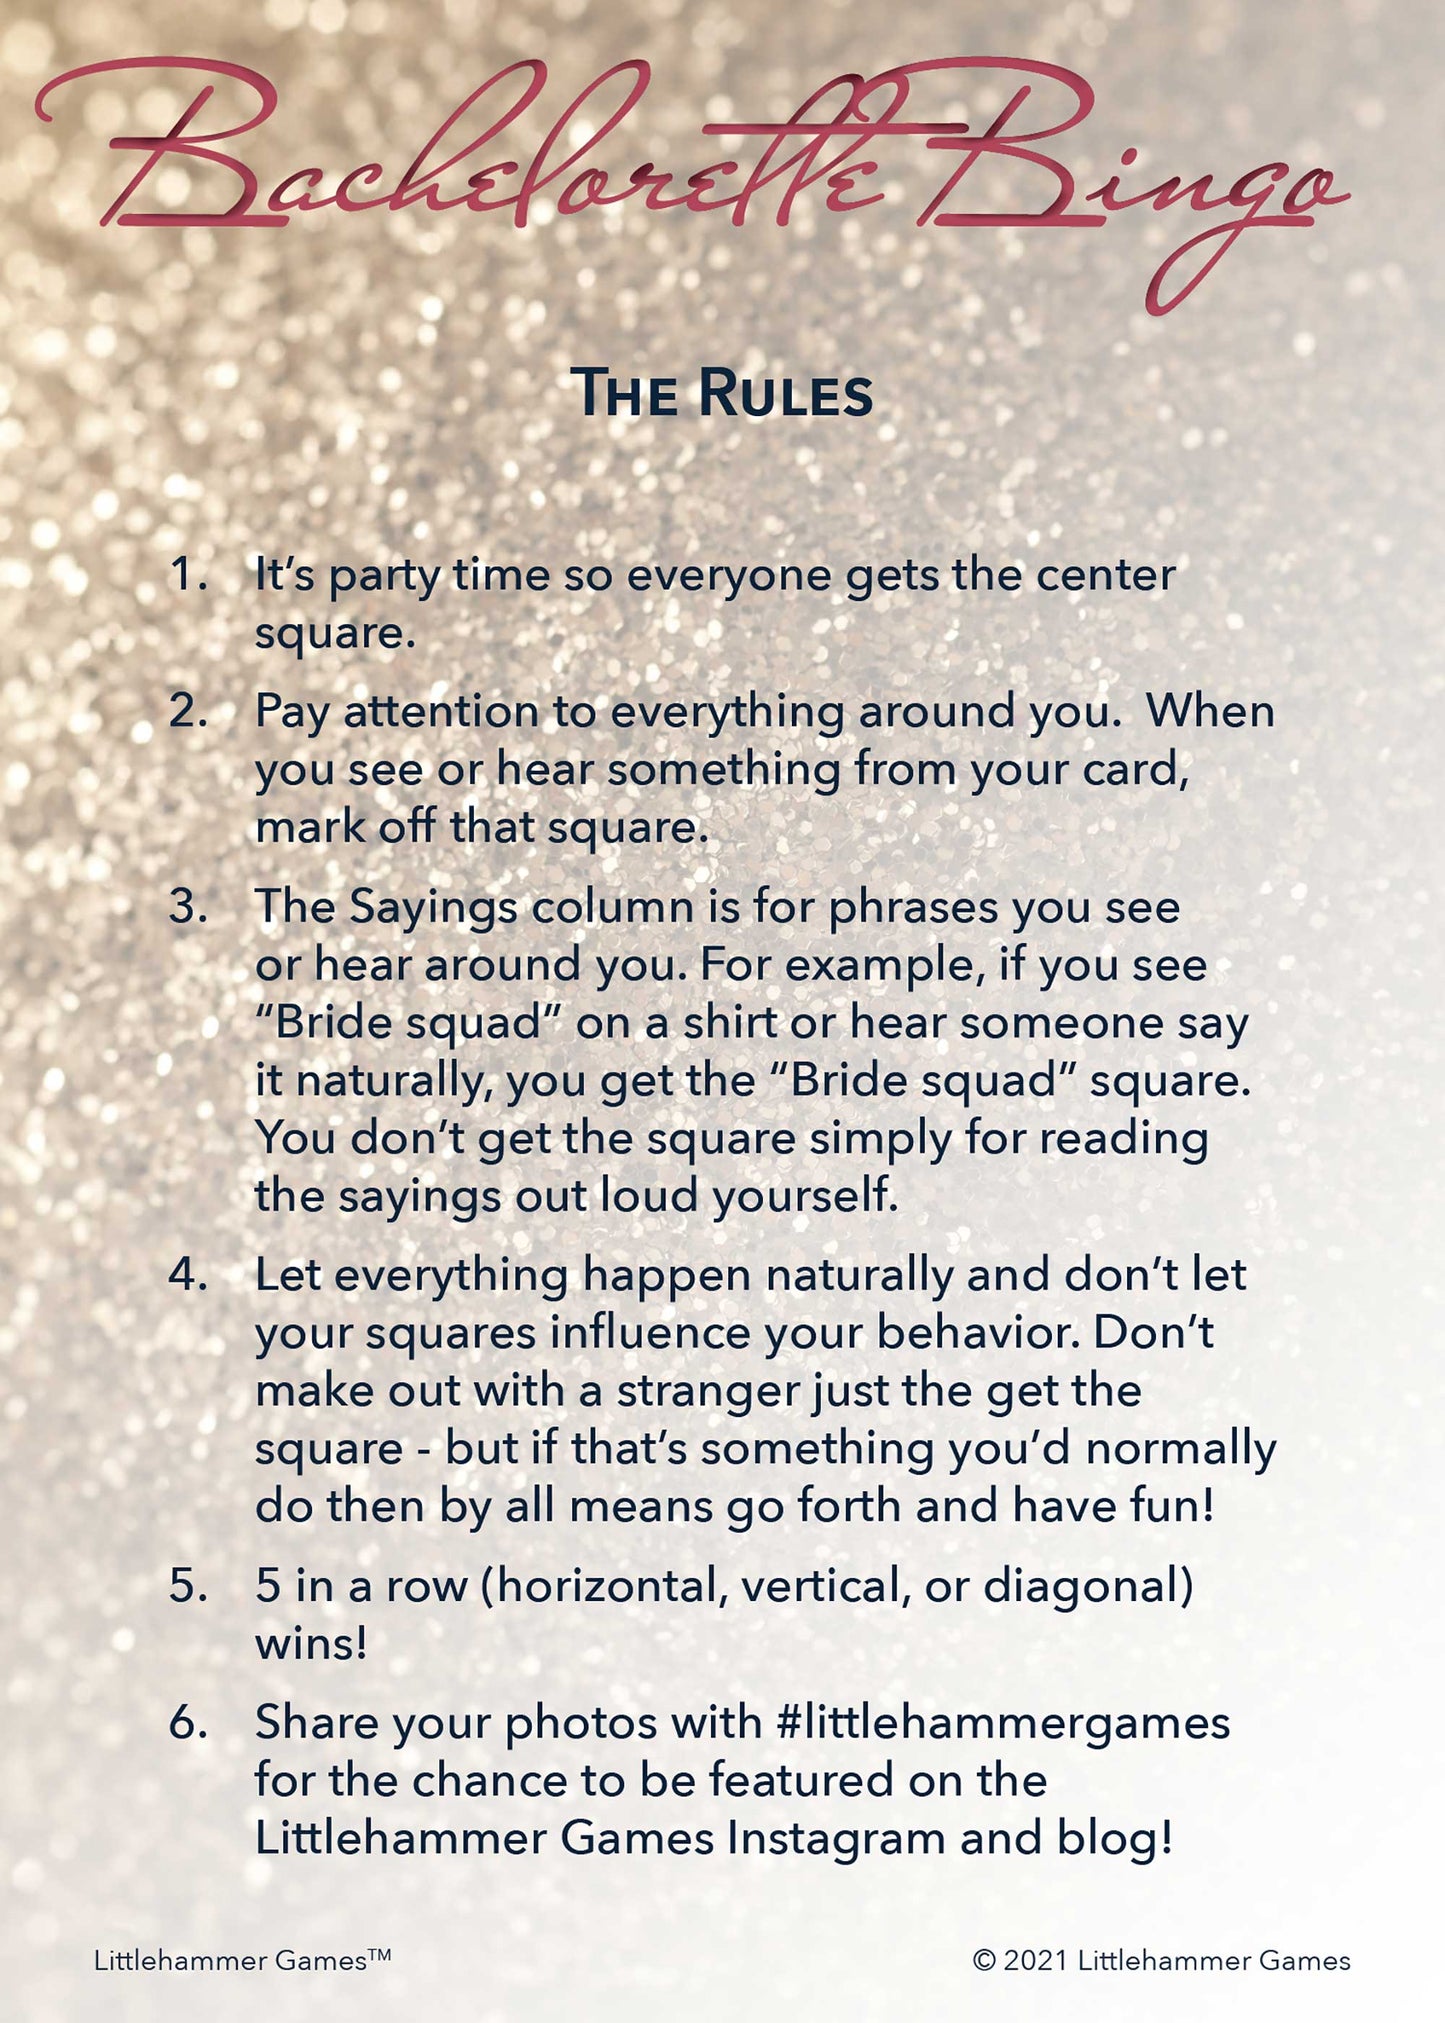 Bachelorette Bingo rules card with a glittery rose gold background